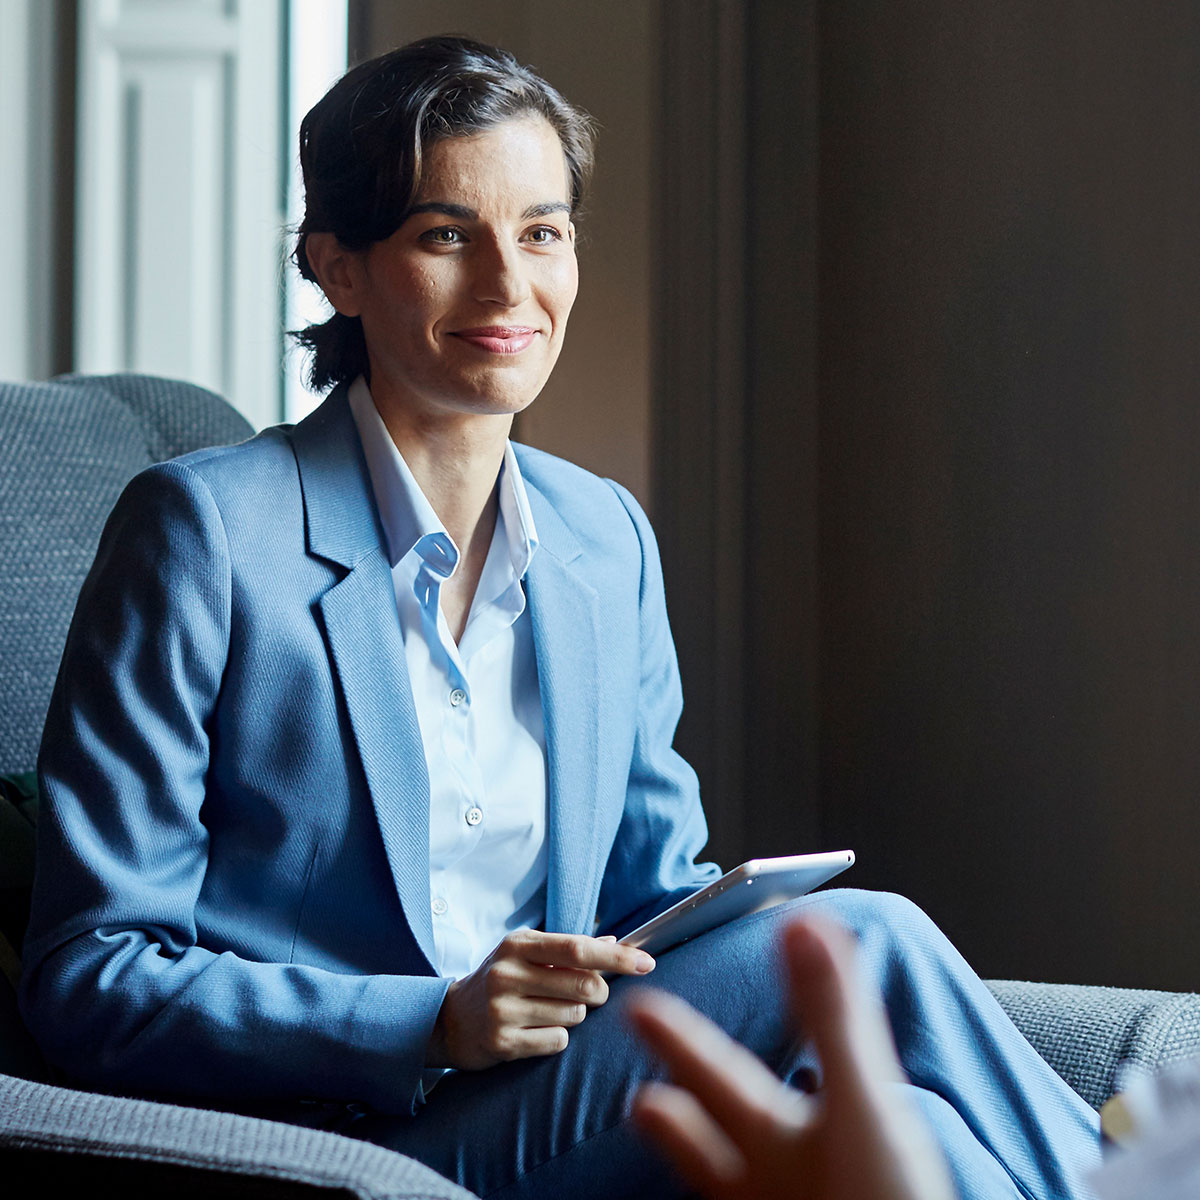 Lady sitting in chair wearing blue business suit